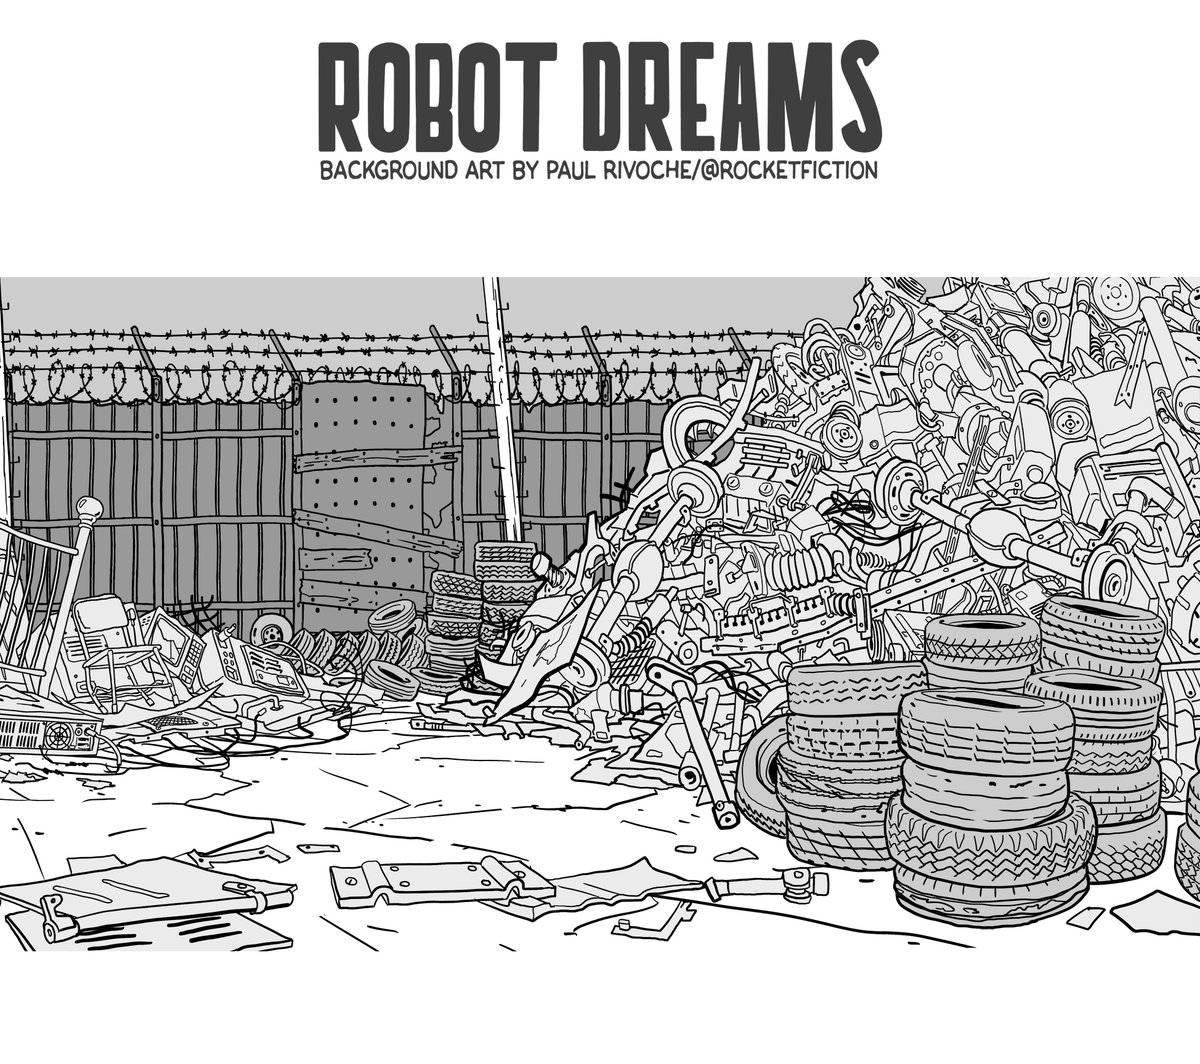 Another complex design from the Scrapyard sequence in #RobotDreams showing elaborate piles of junk. The end of the world for a robot! This design was used in various framings and shots.